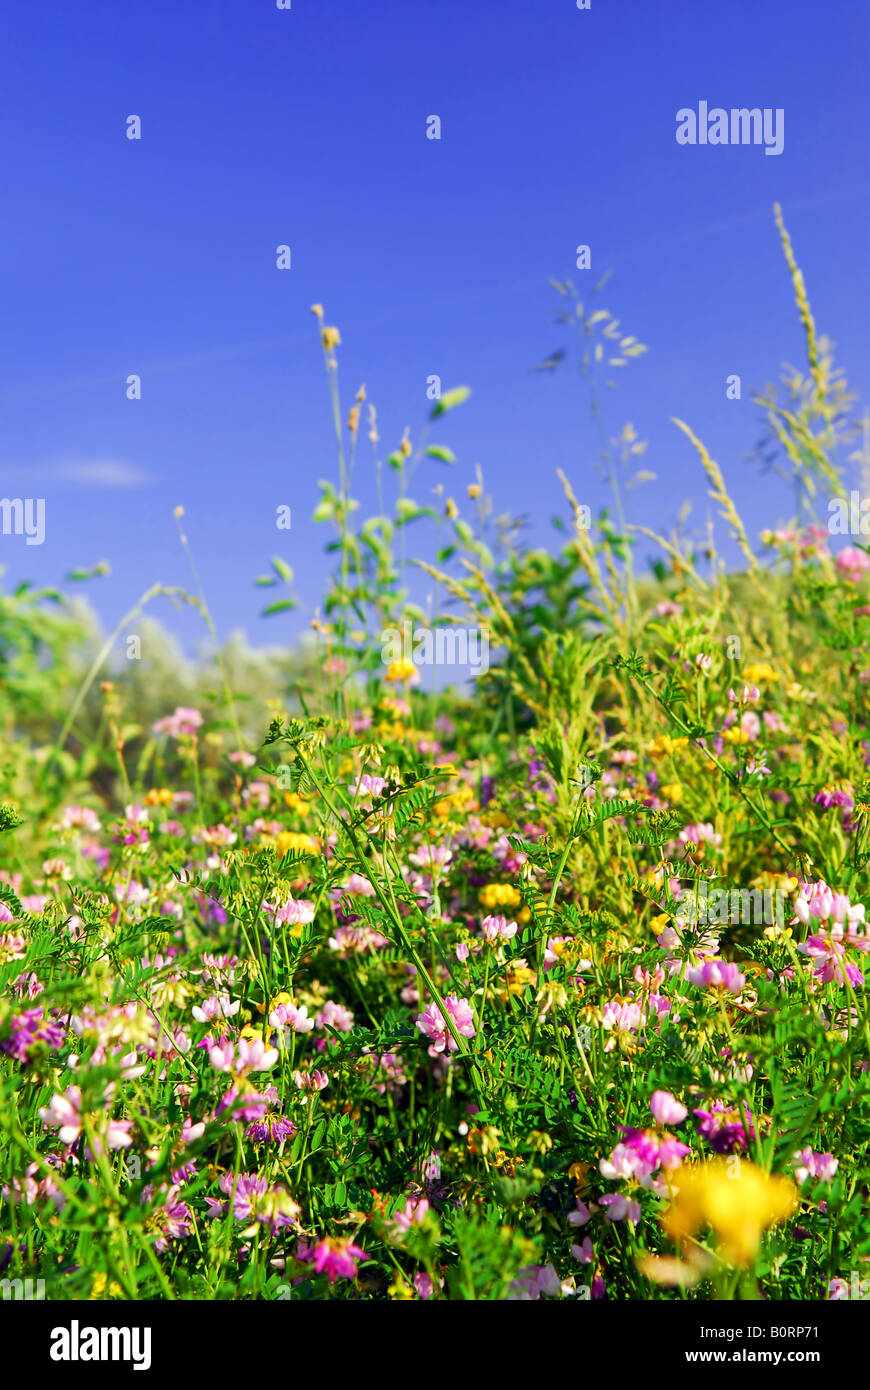 Summer meadow background with various blooming wild flowers and green grasses Stock Photo